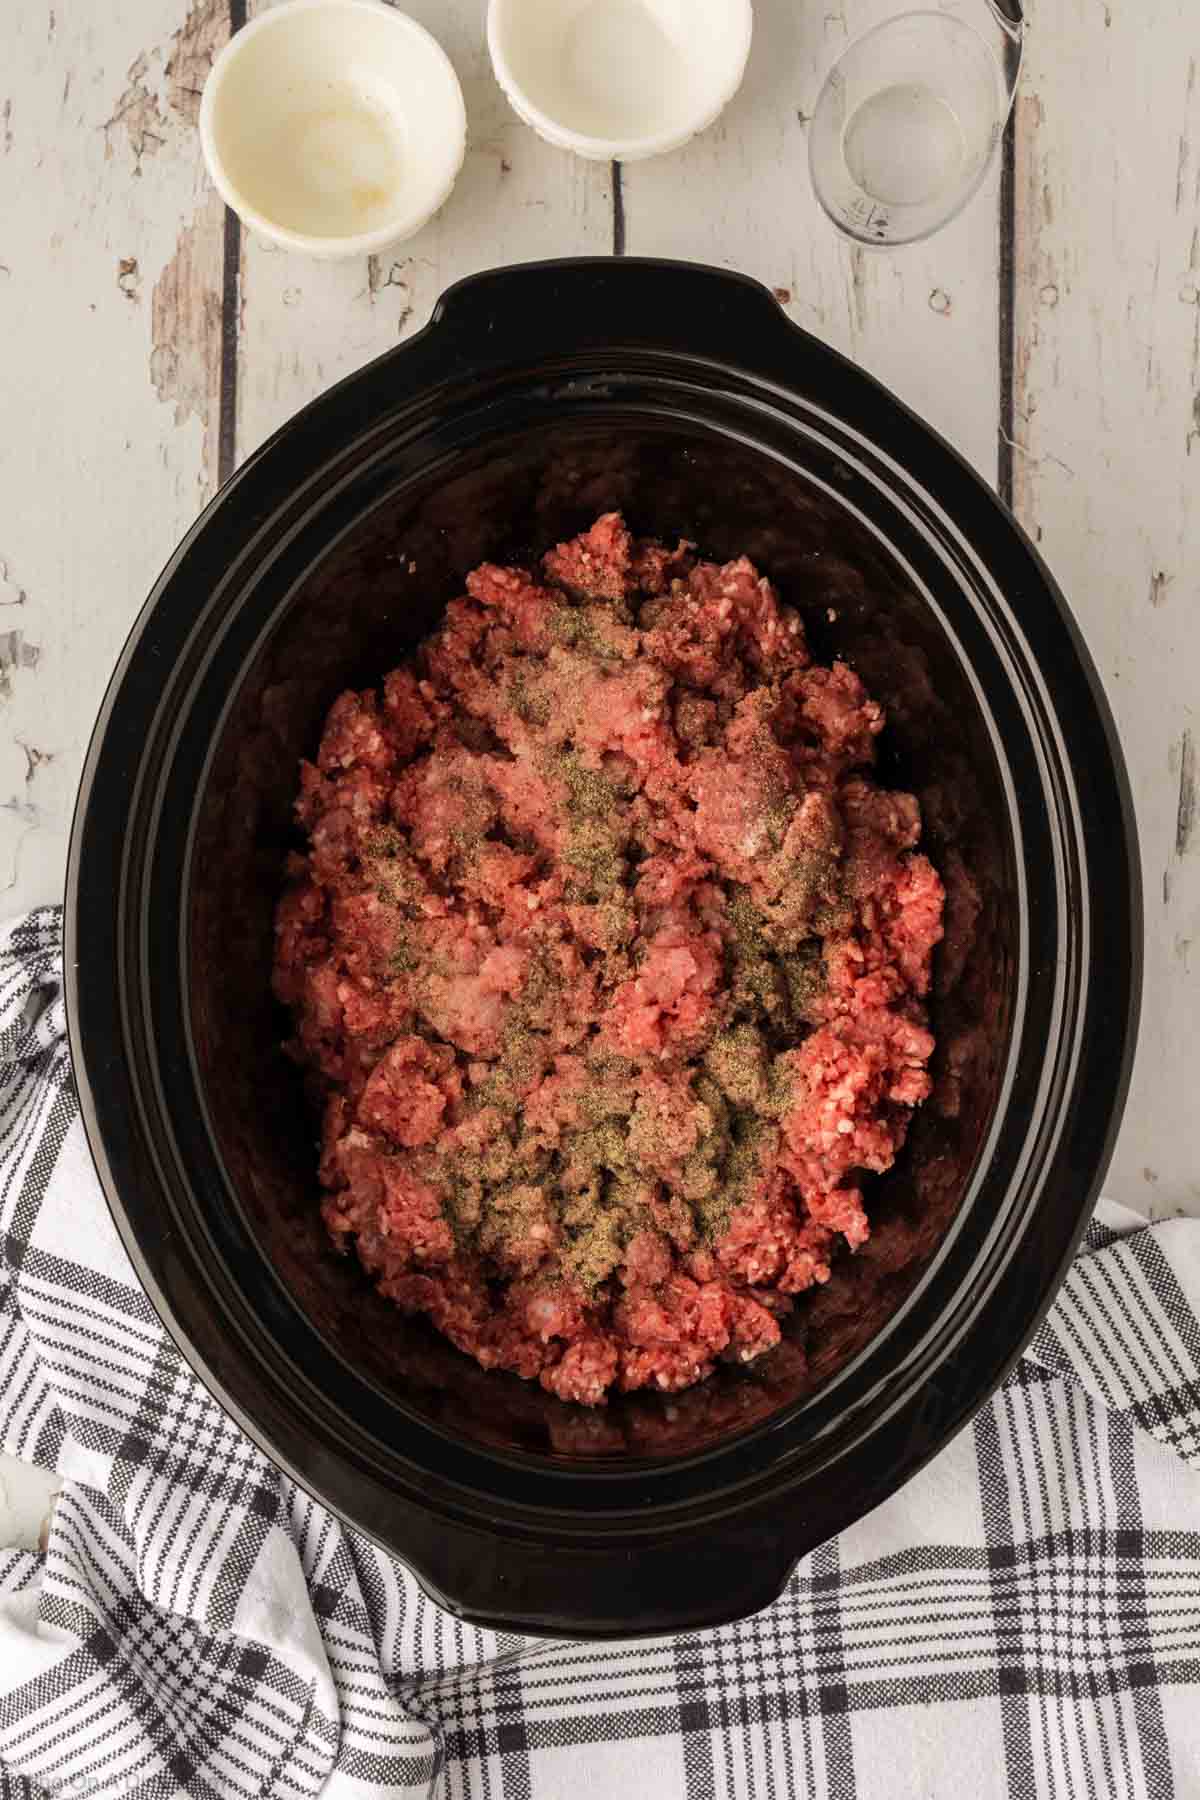 Placing the raw ground beef in the slow cooker with the seasoning